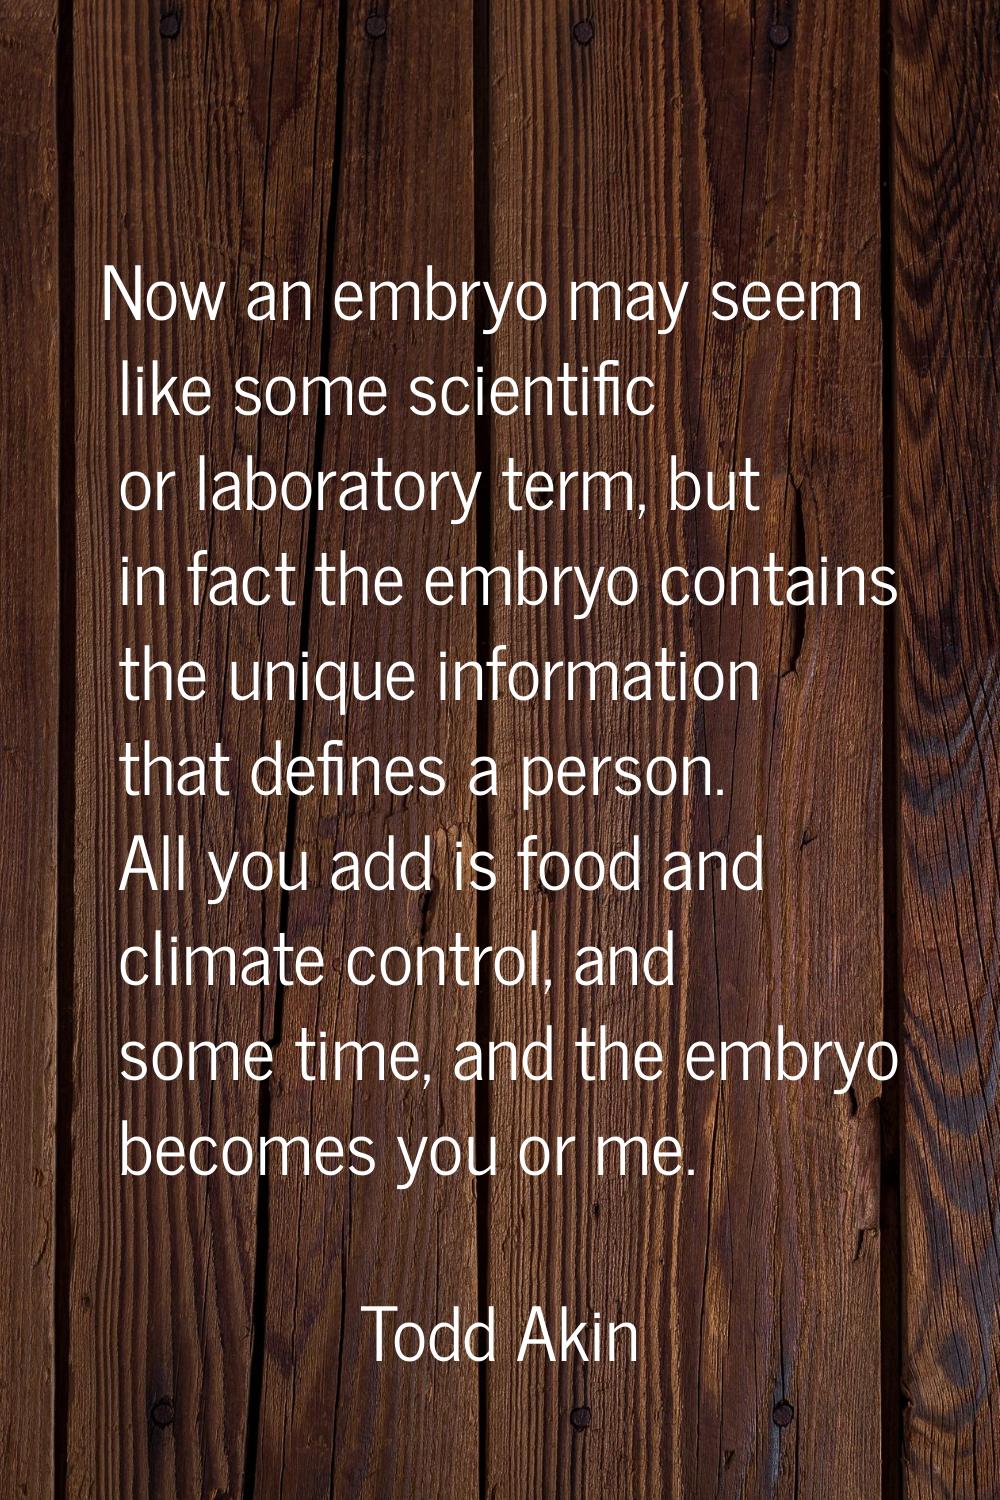 Now an embryo may seem like some scientific or laboratory term, but in fact the embryo contains the